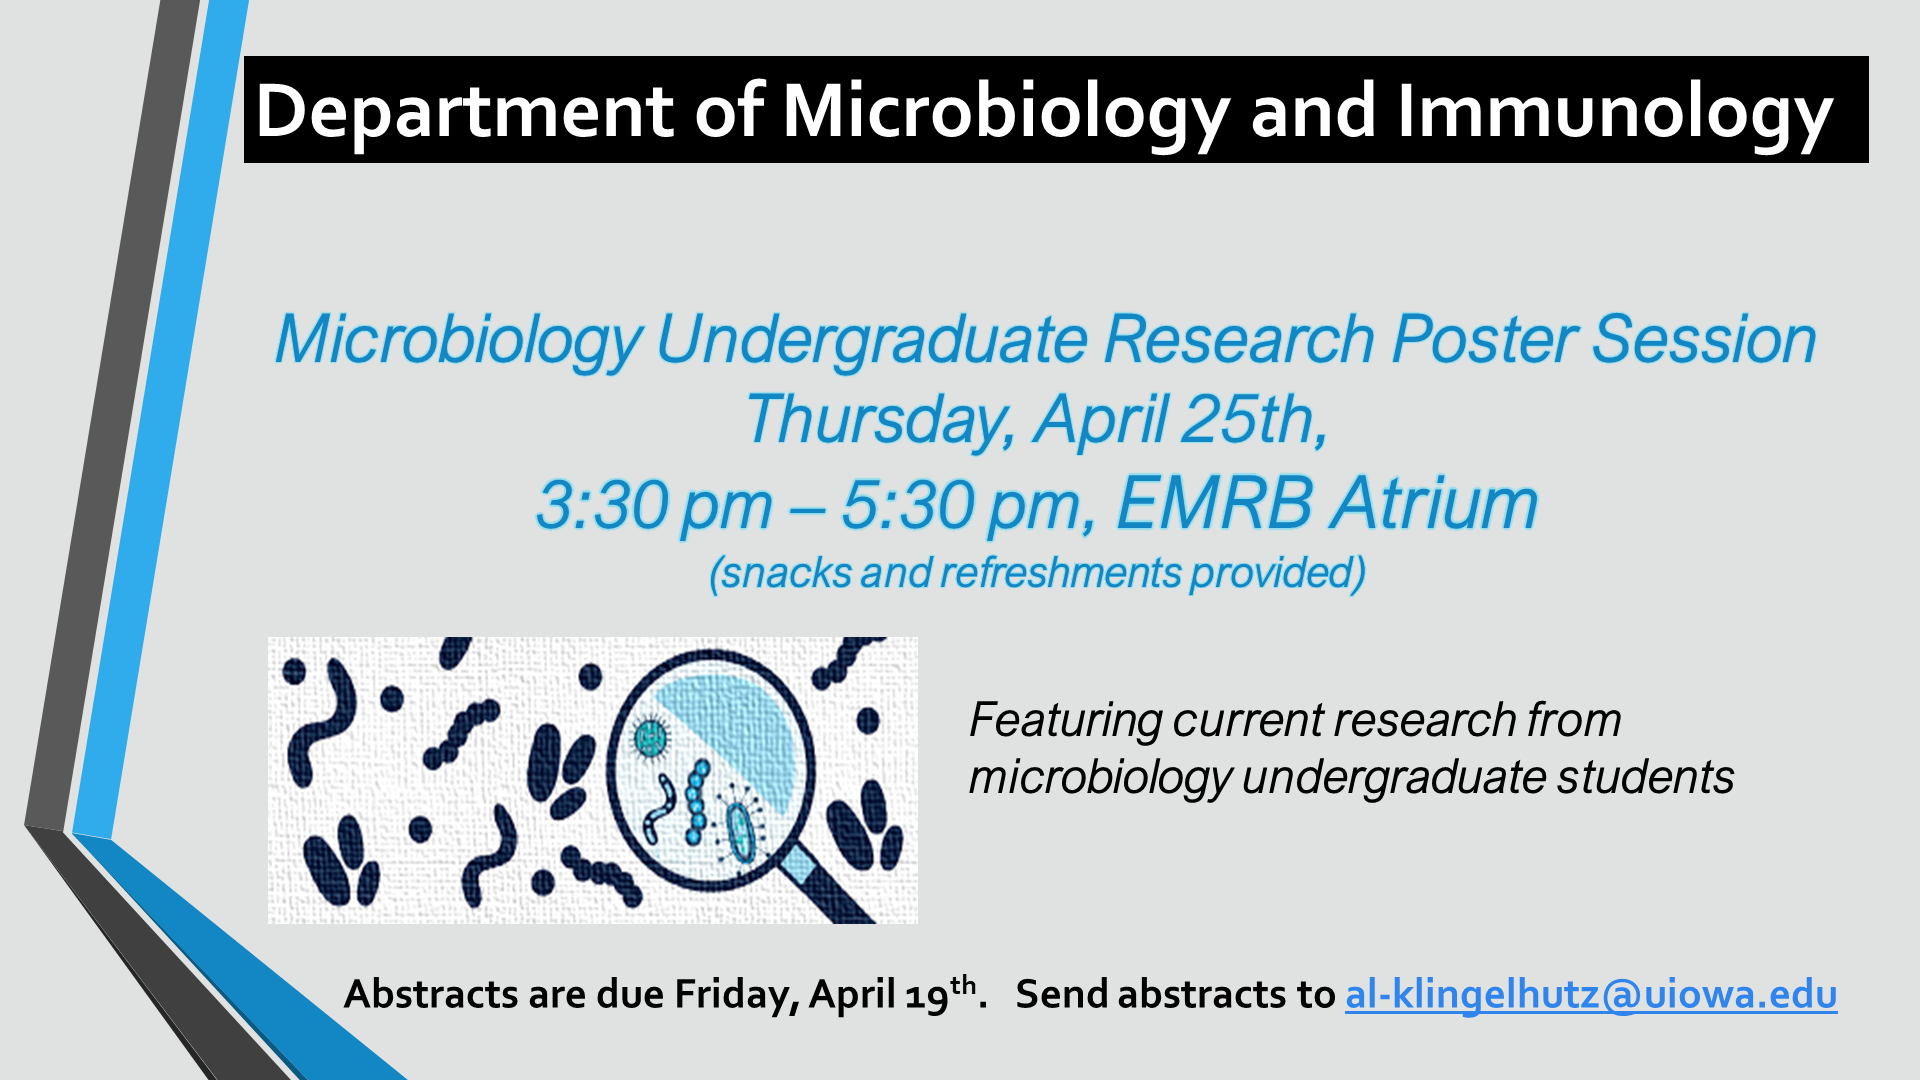 Spring Microbiology Undergraduate Poster Session promotional image